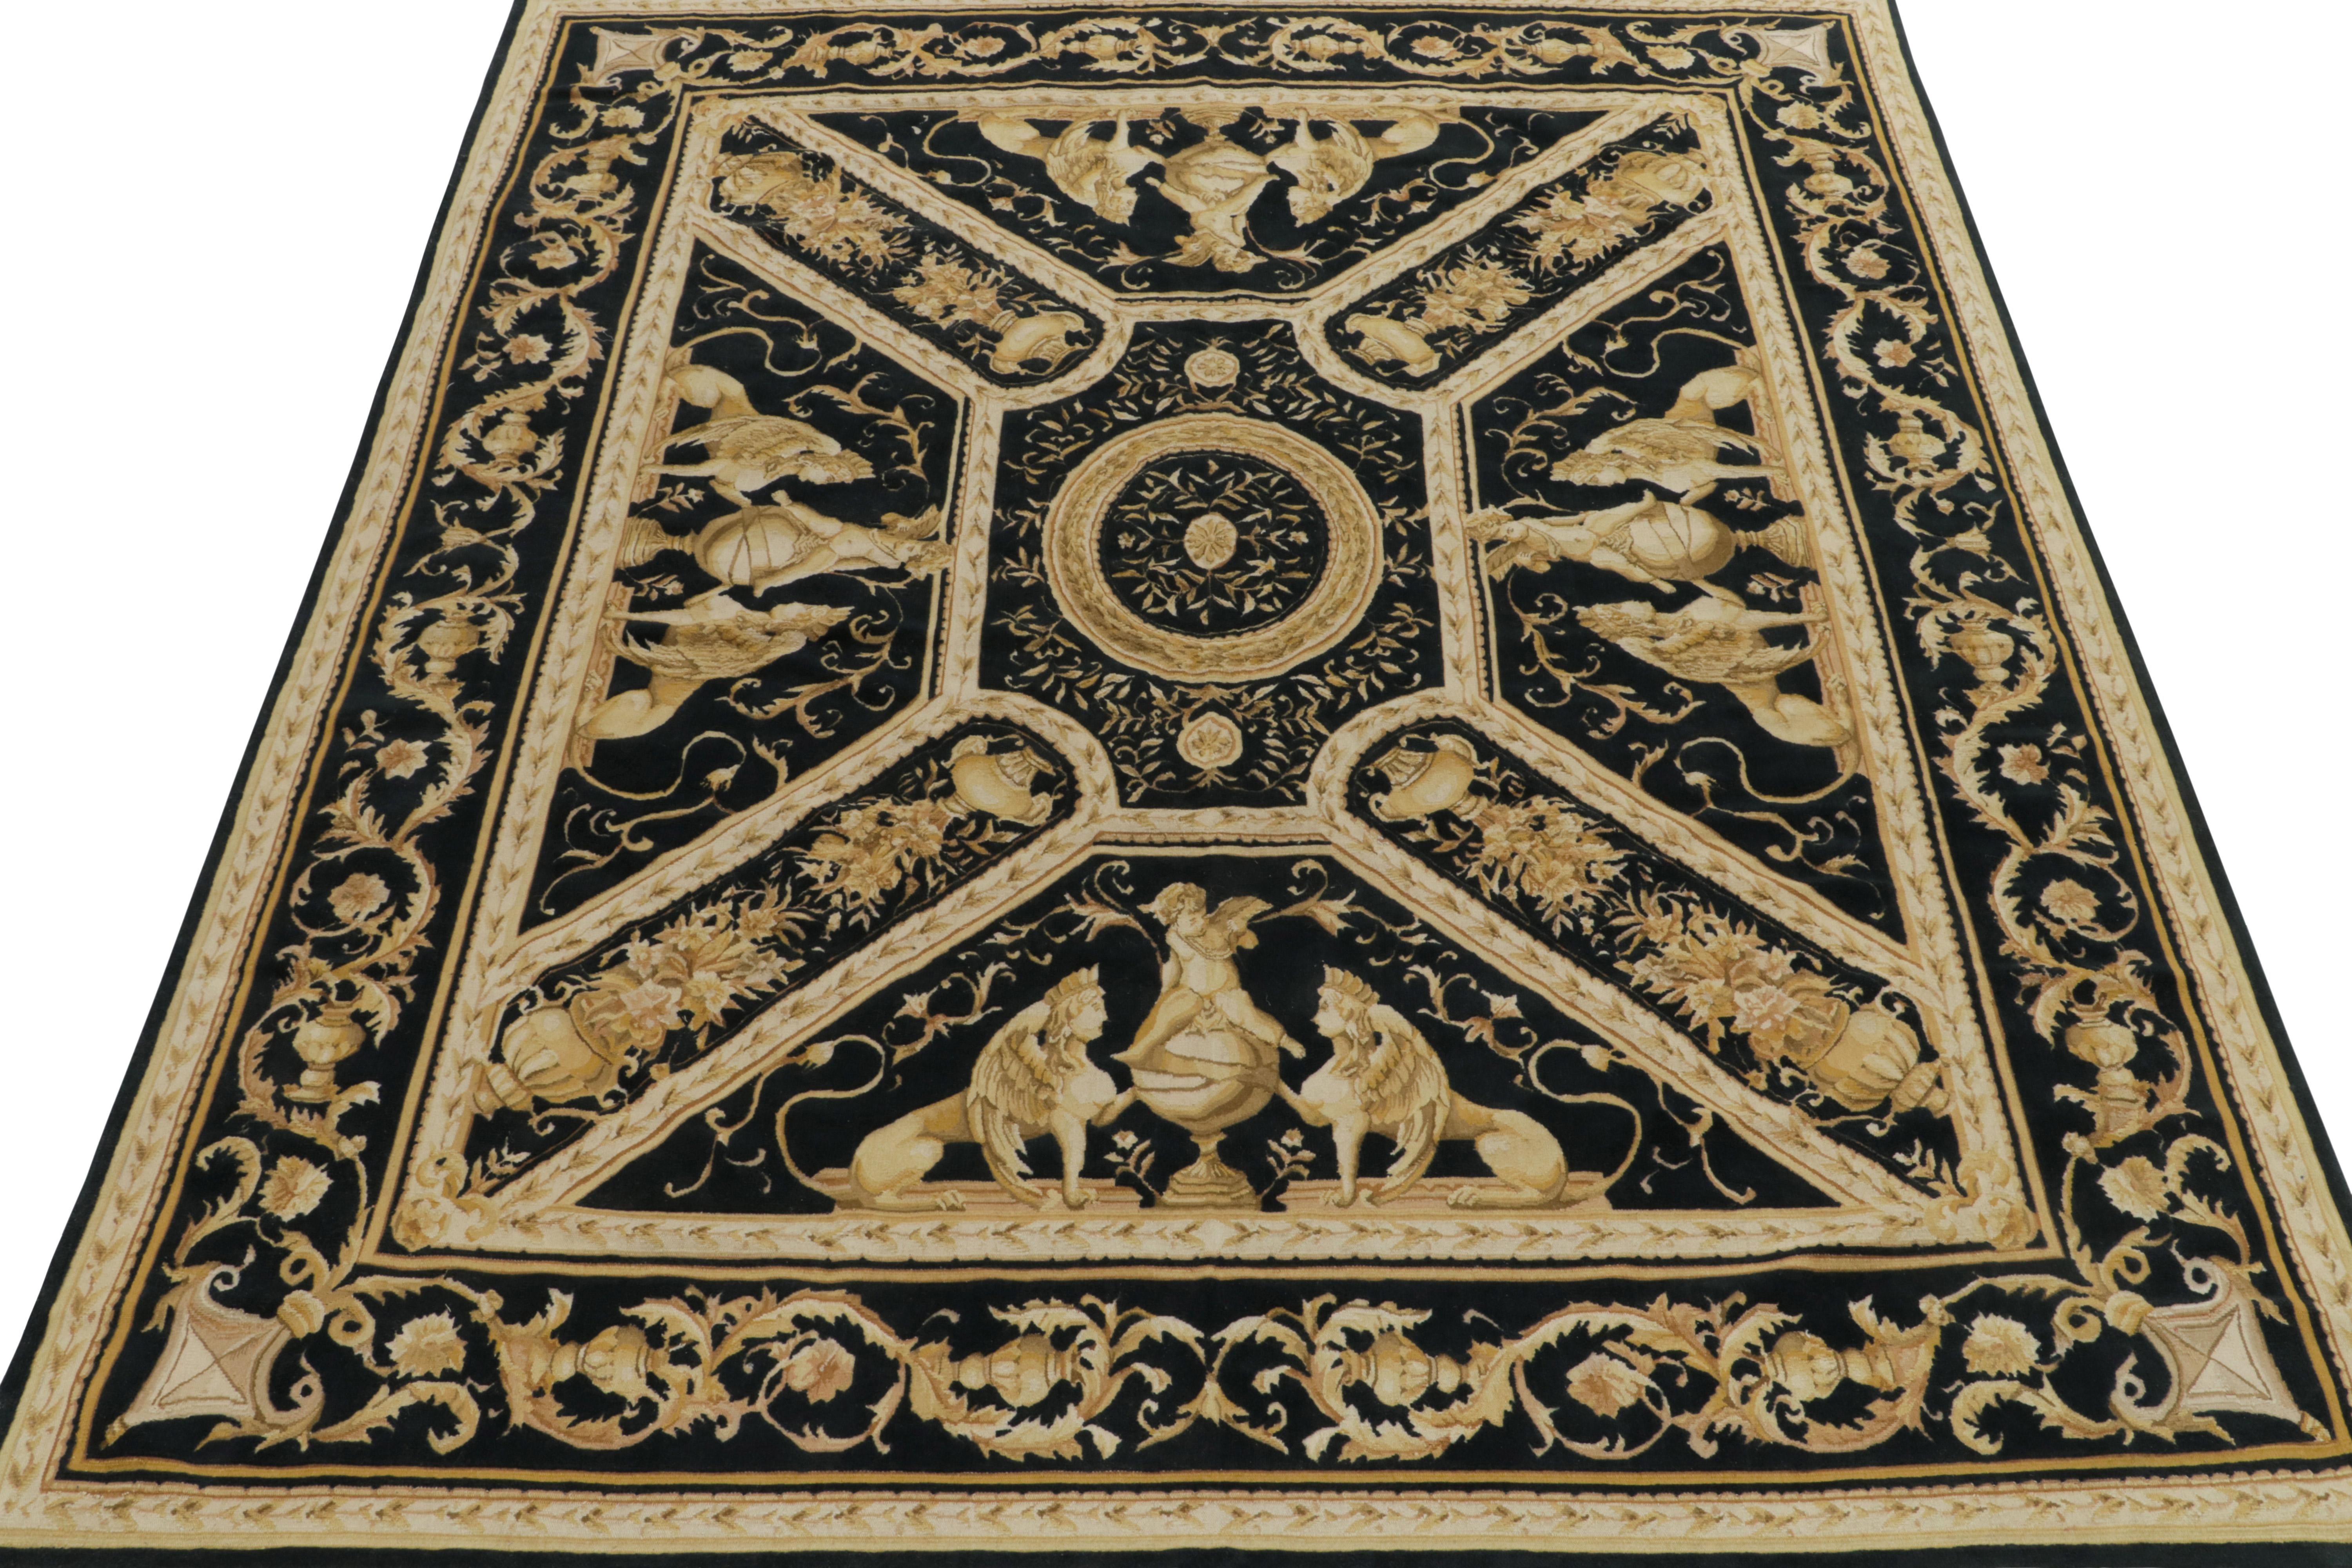 From Rug & Kilim’s European collection, an 8x10 Tudor style flatweave with medallions & pictorial patterns in regal black, gold & off white. Handwoven in wool, a fine weave with coarse & durable additions in a subtle high low texture well suited for